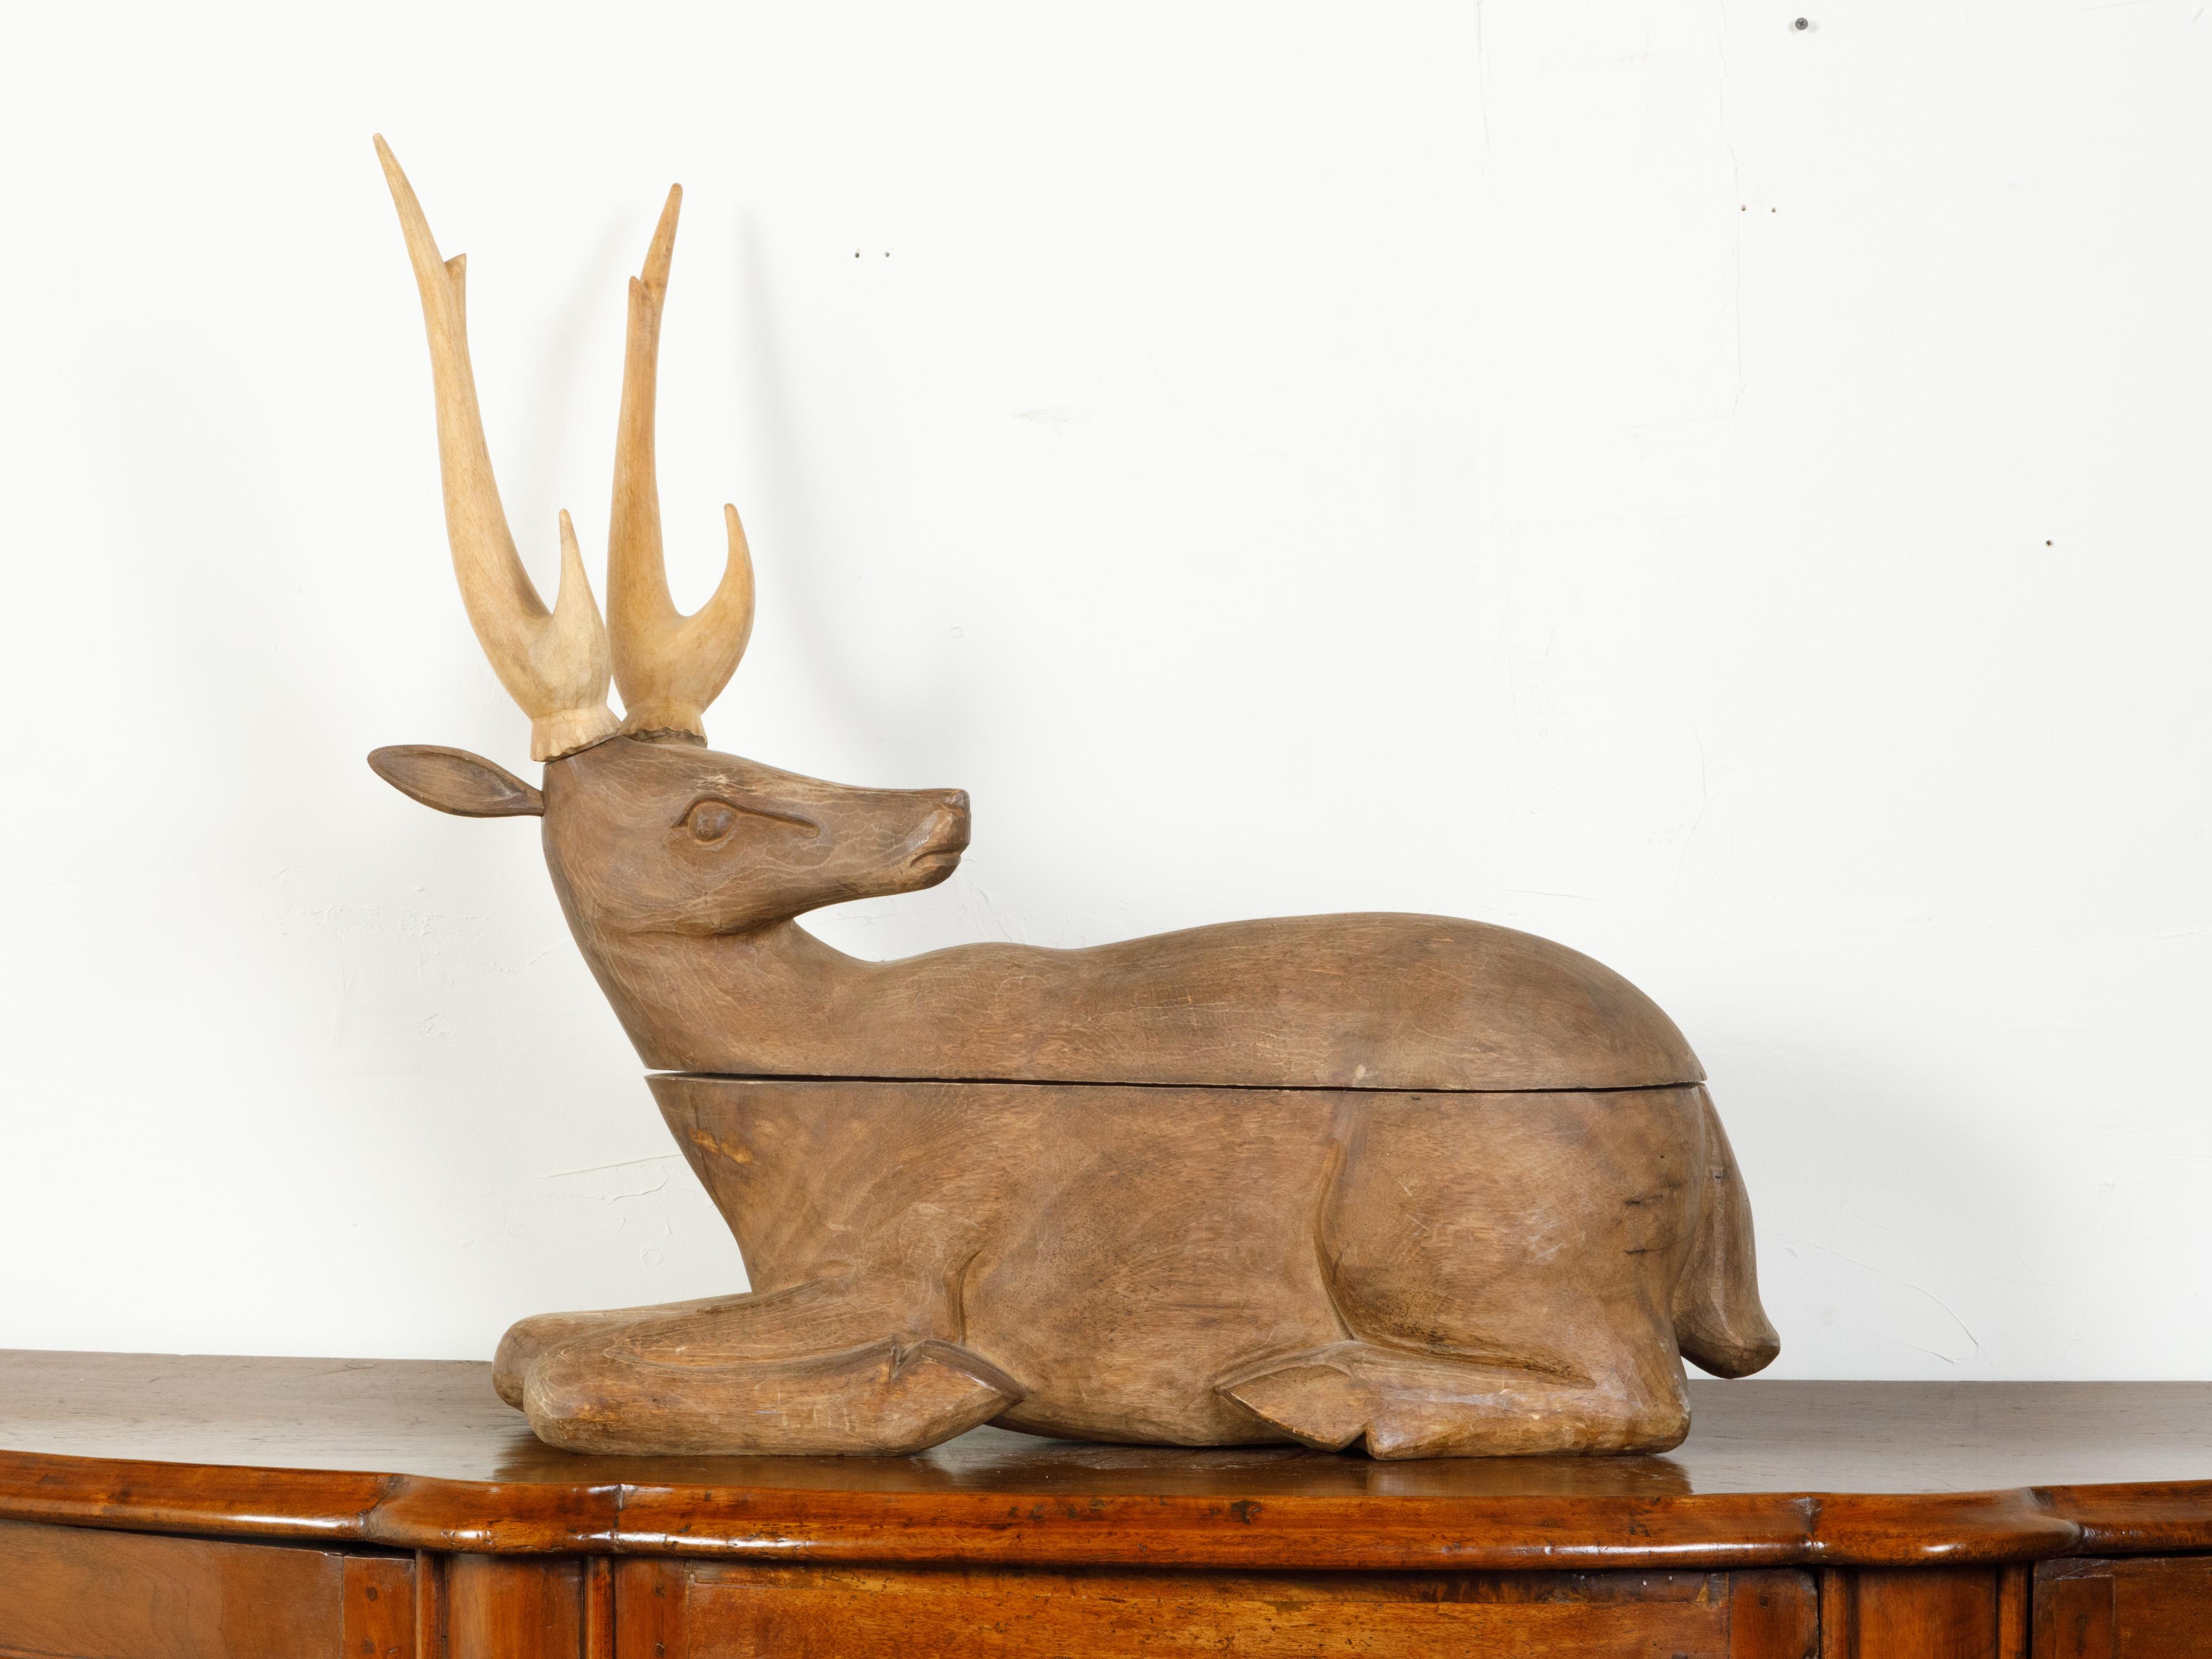 A large English carved wooden box from the early 20th century, depicting a stag. Created in England during the second quarter of the 20th century, this decorative box captures our attention with its simple yet elegant depiction of a reclining stag,